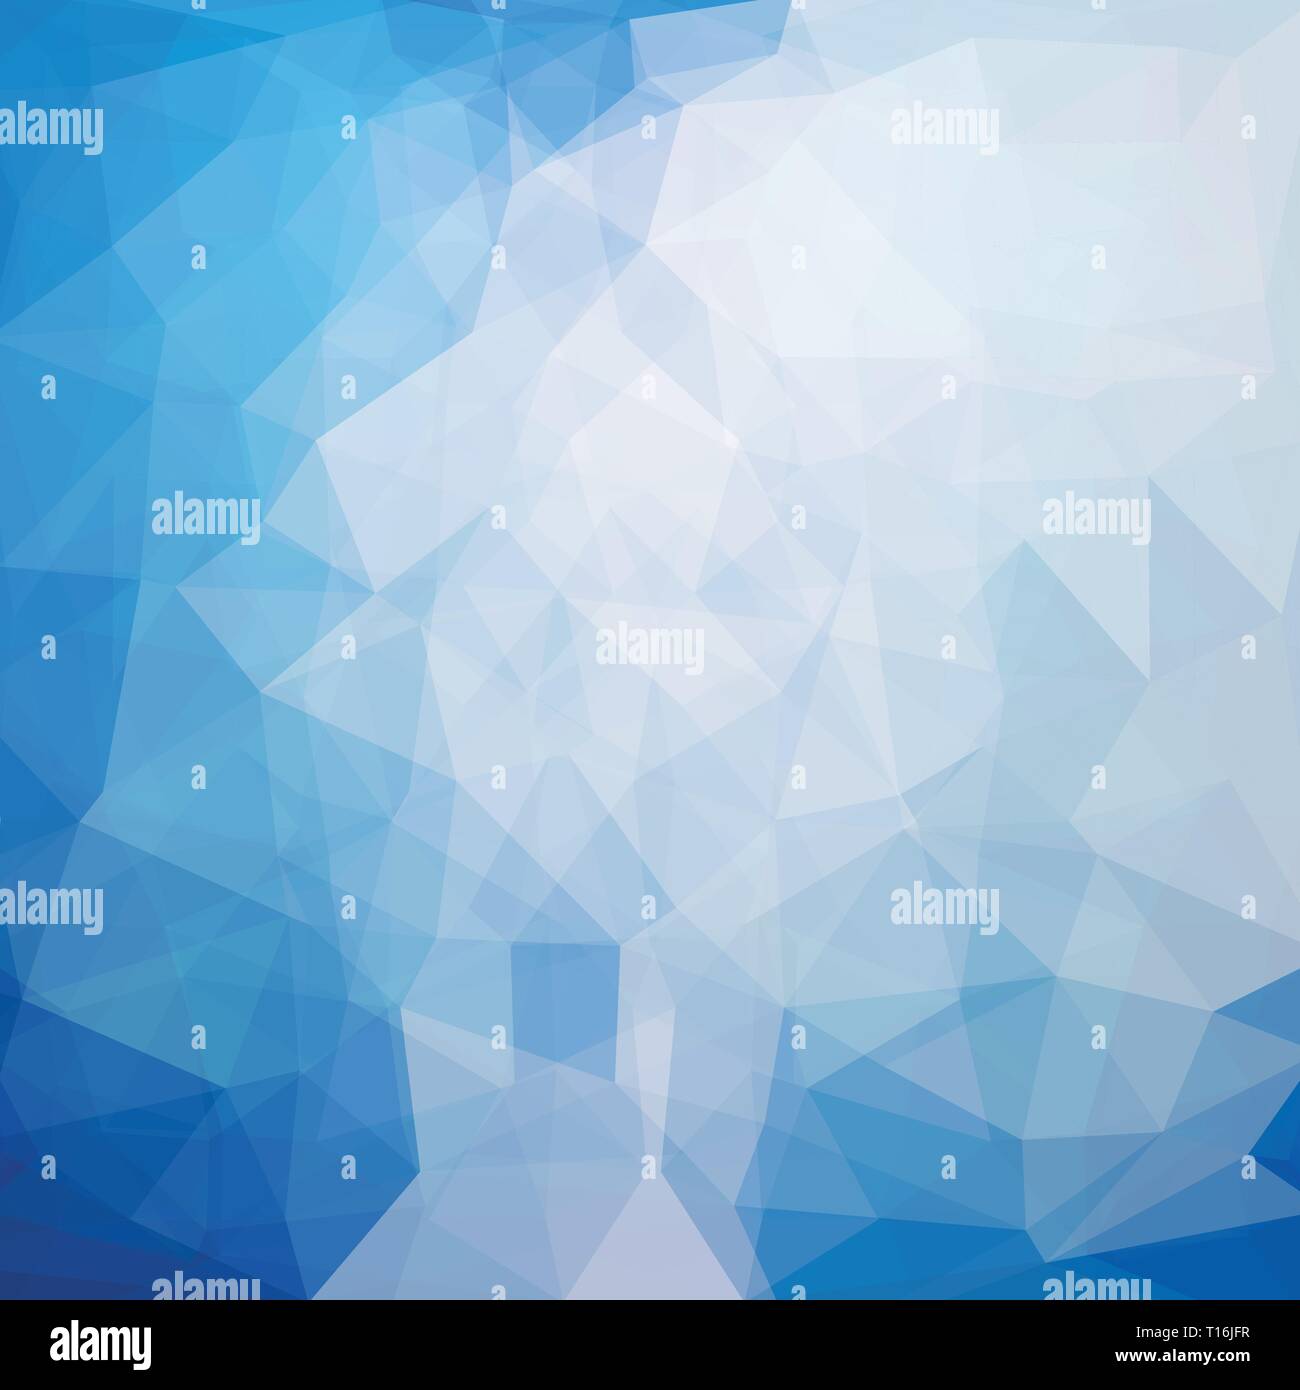 Abstract polygonal background of many triangles in blue colors Stock Vector